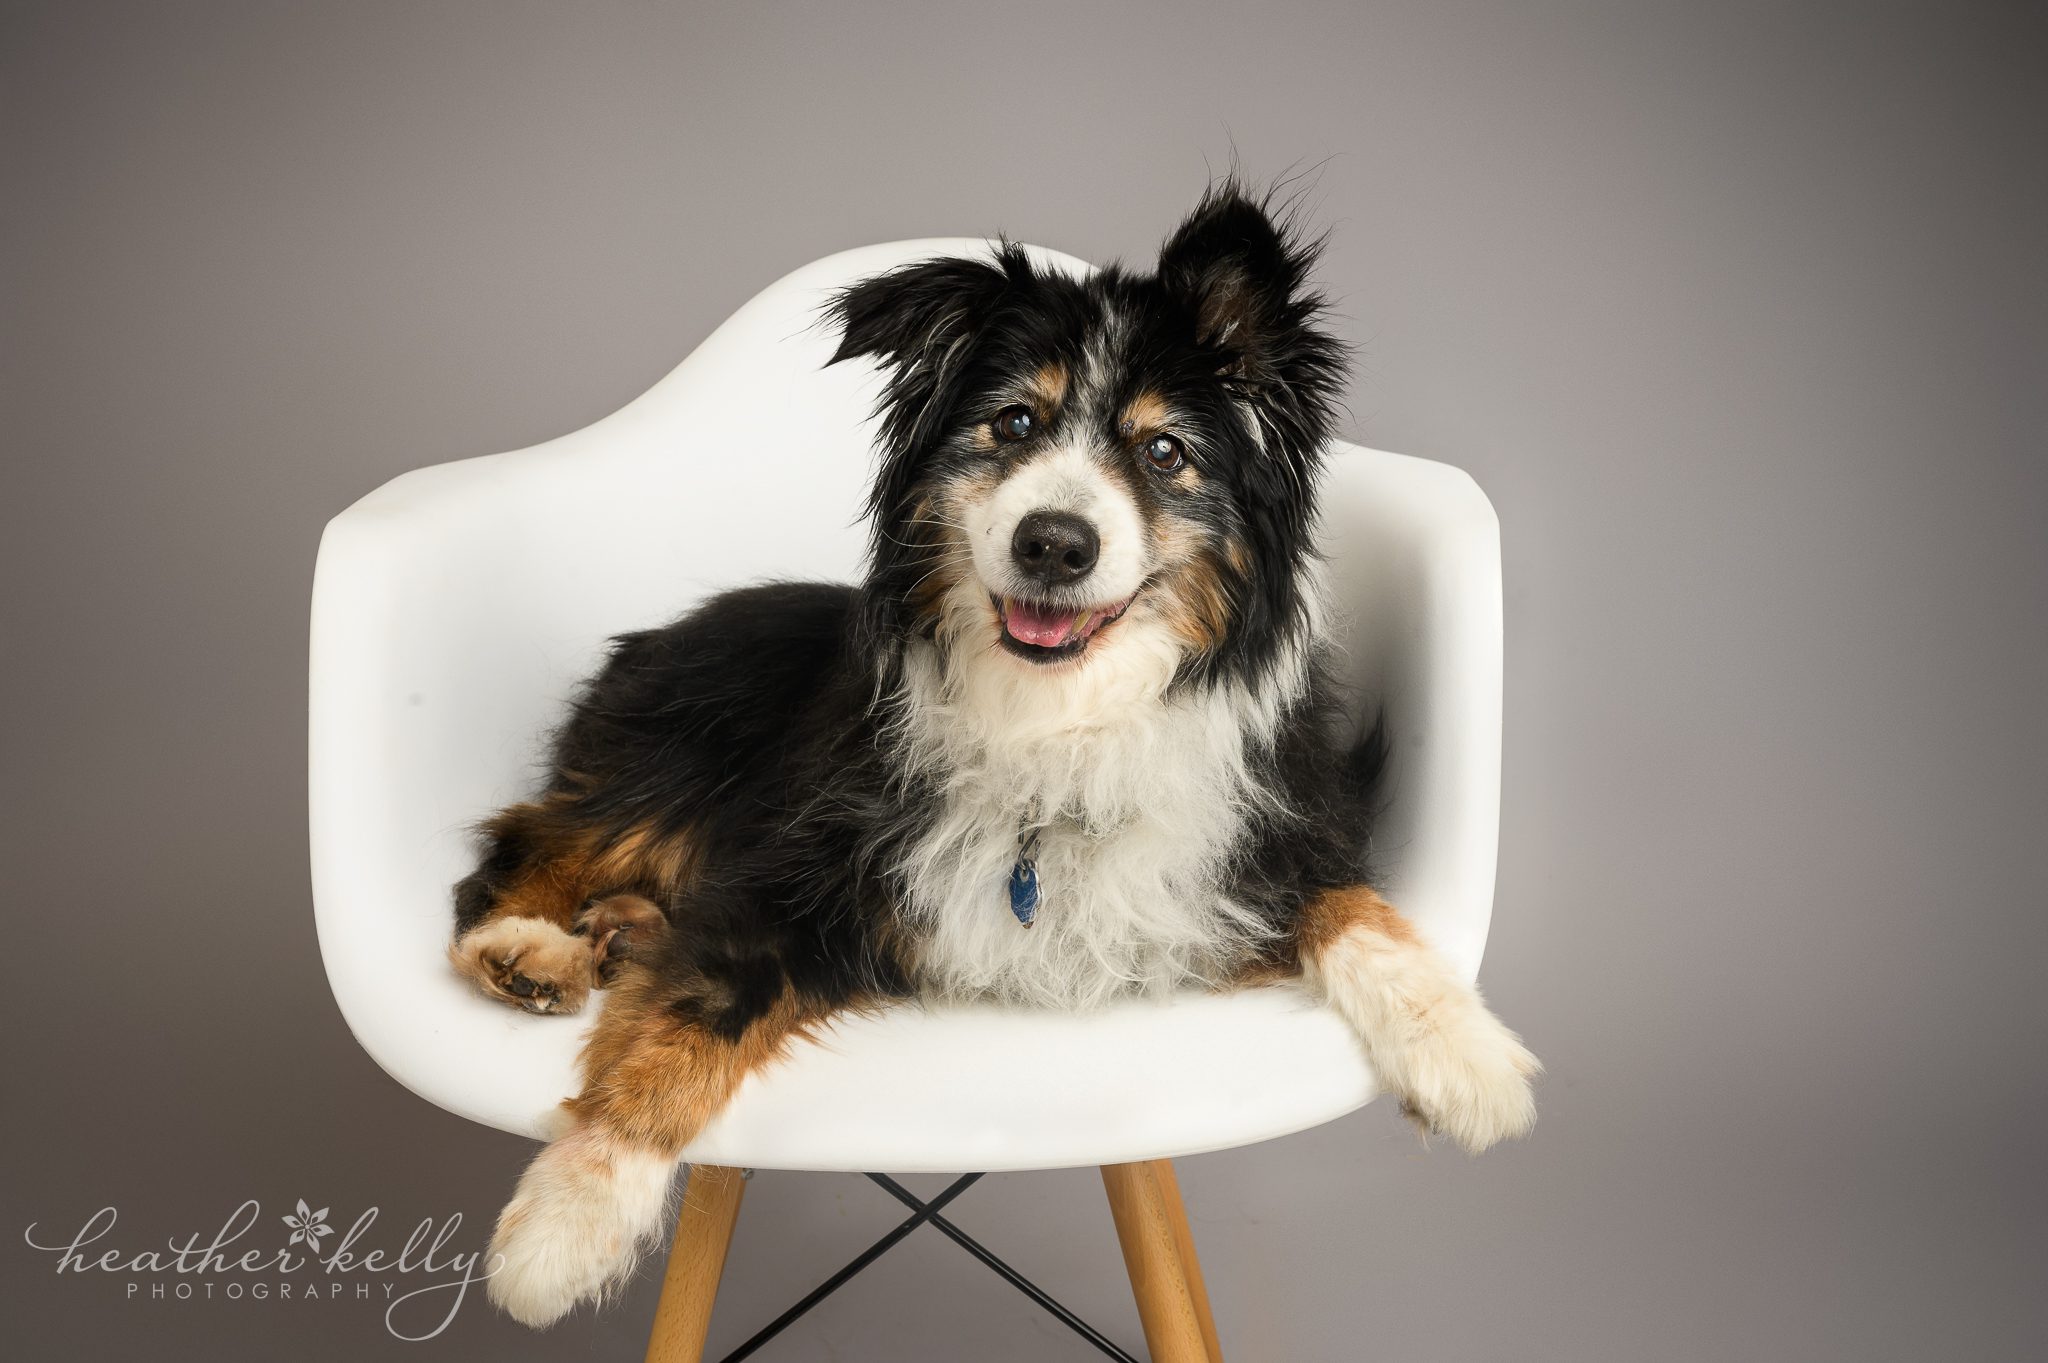 An elderly dog poses on a white chair with a gray backdrop doing a professional photo shoot in CT.